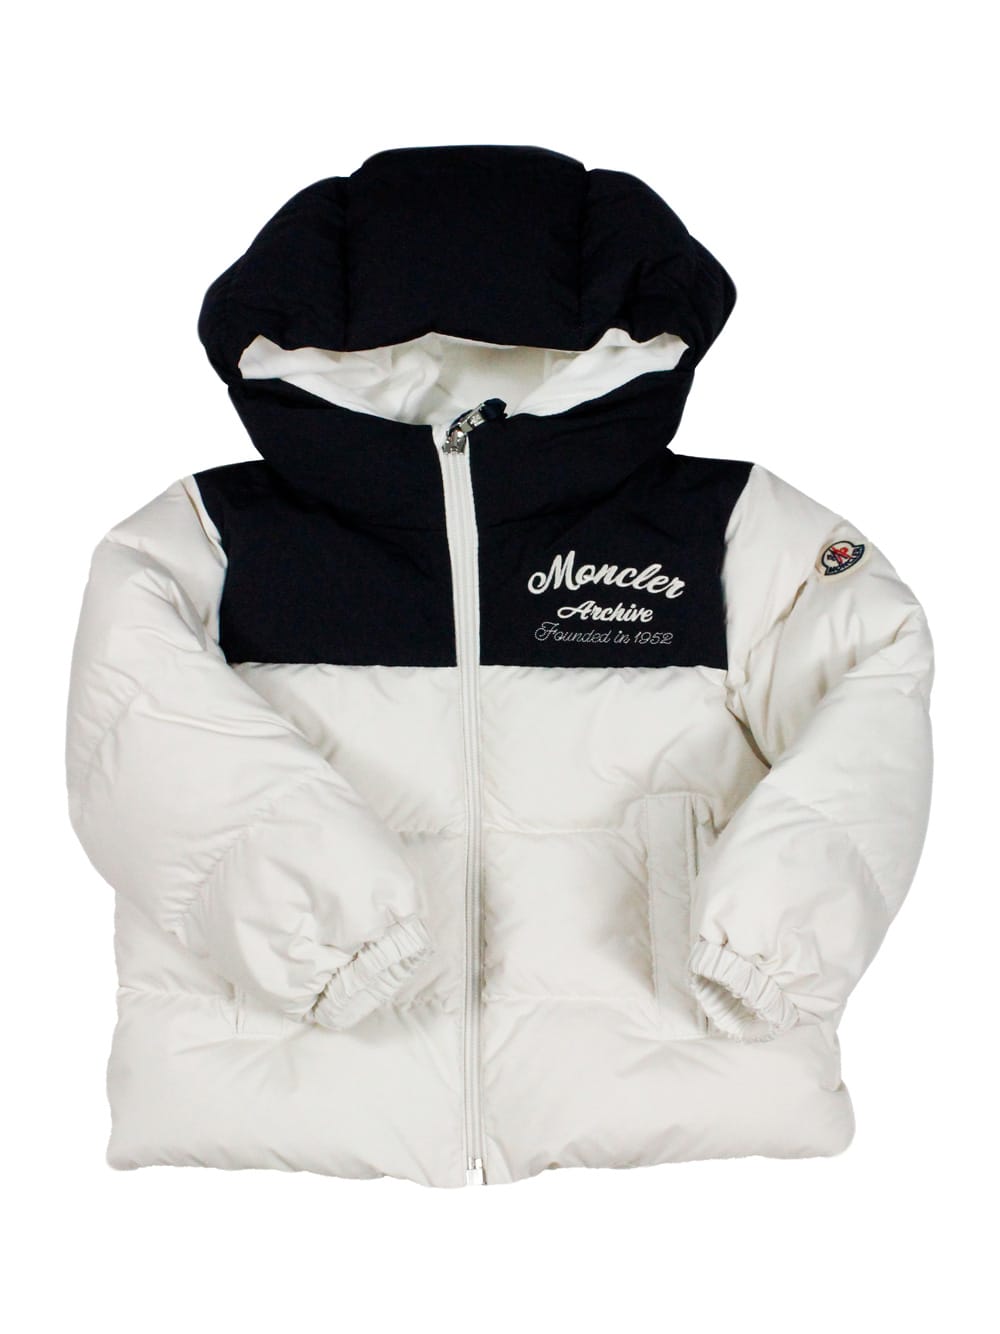 Moncler Joe Down Jacket Padded In Real Two-tone White And Blue Goose Down With Hood And Zip Closure Welt Pockets On The Front